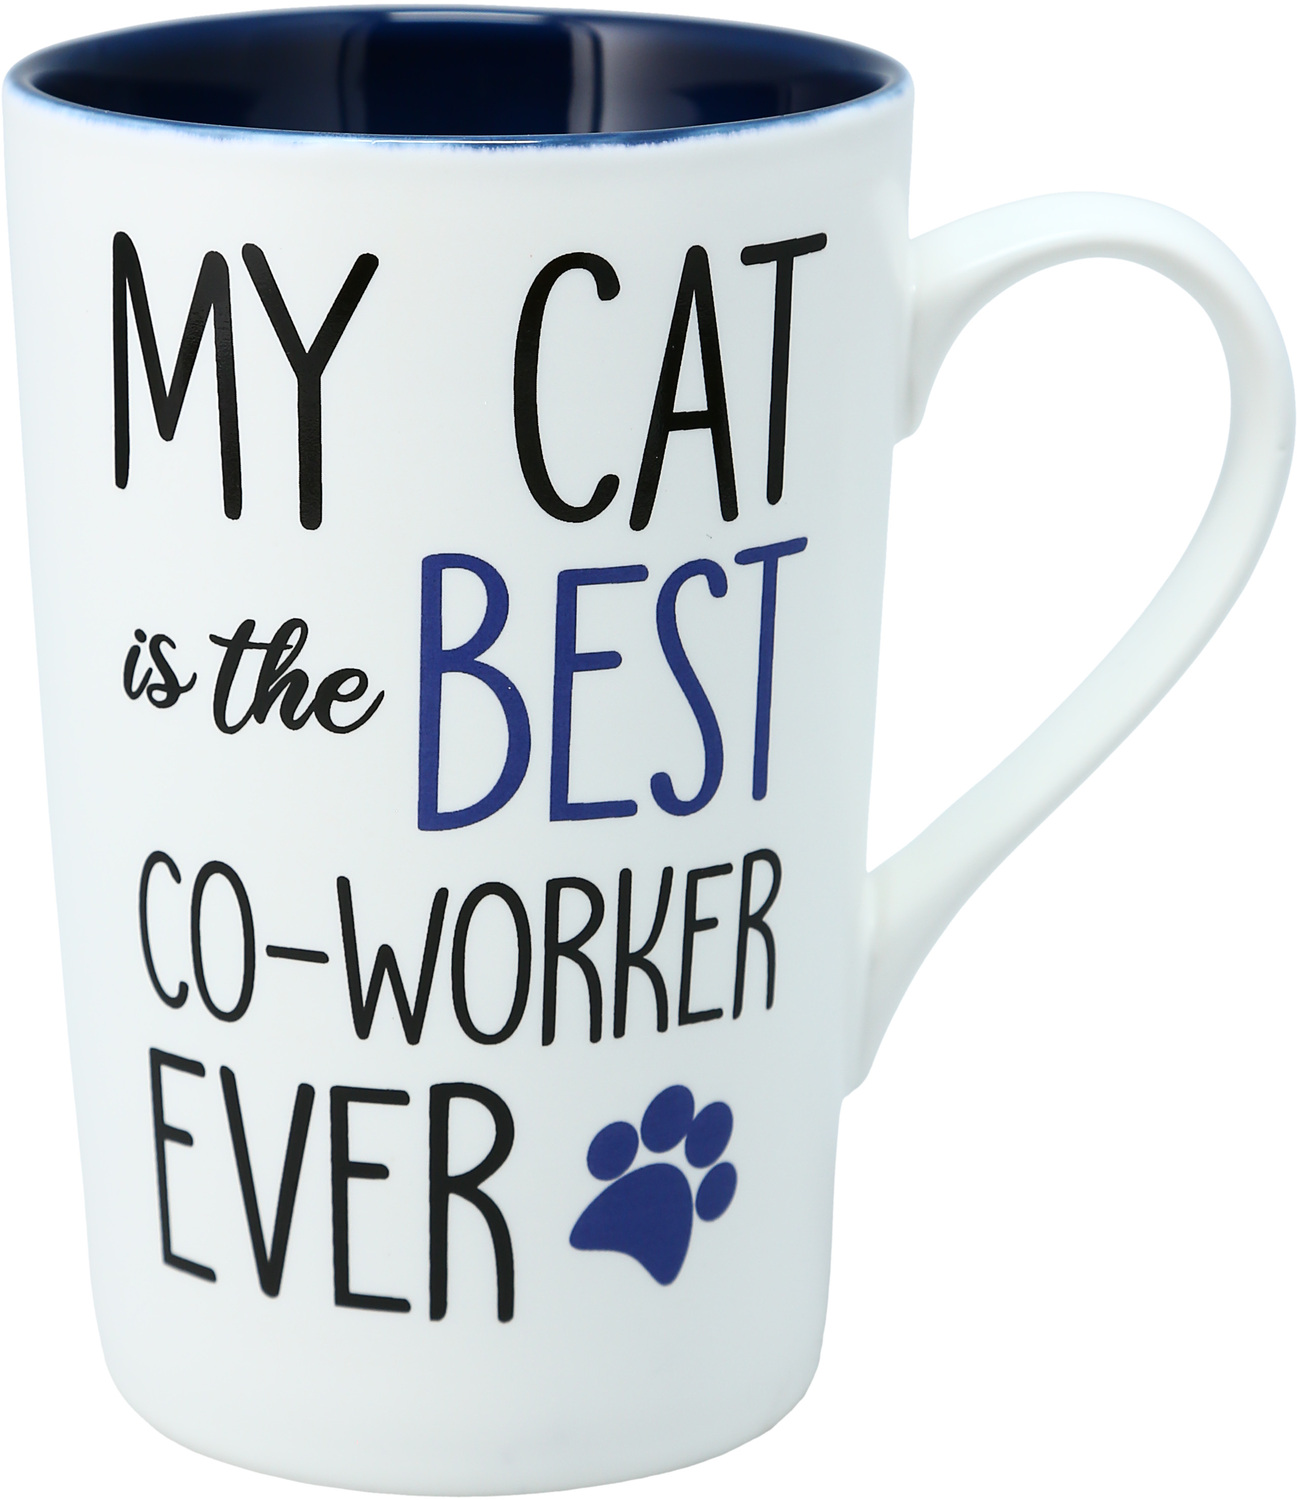 My Cat by Essentially Yours - My Cat - 15 oz Latte Cup